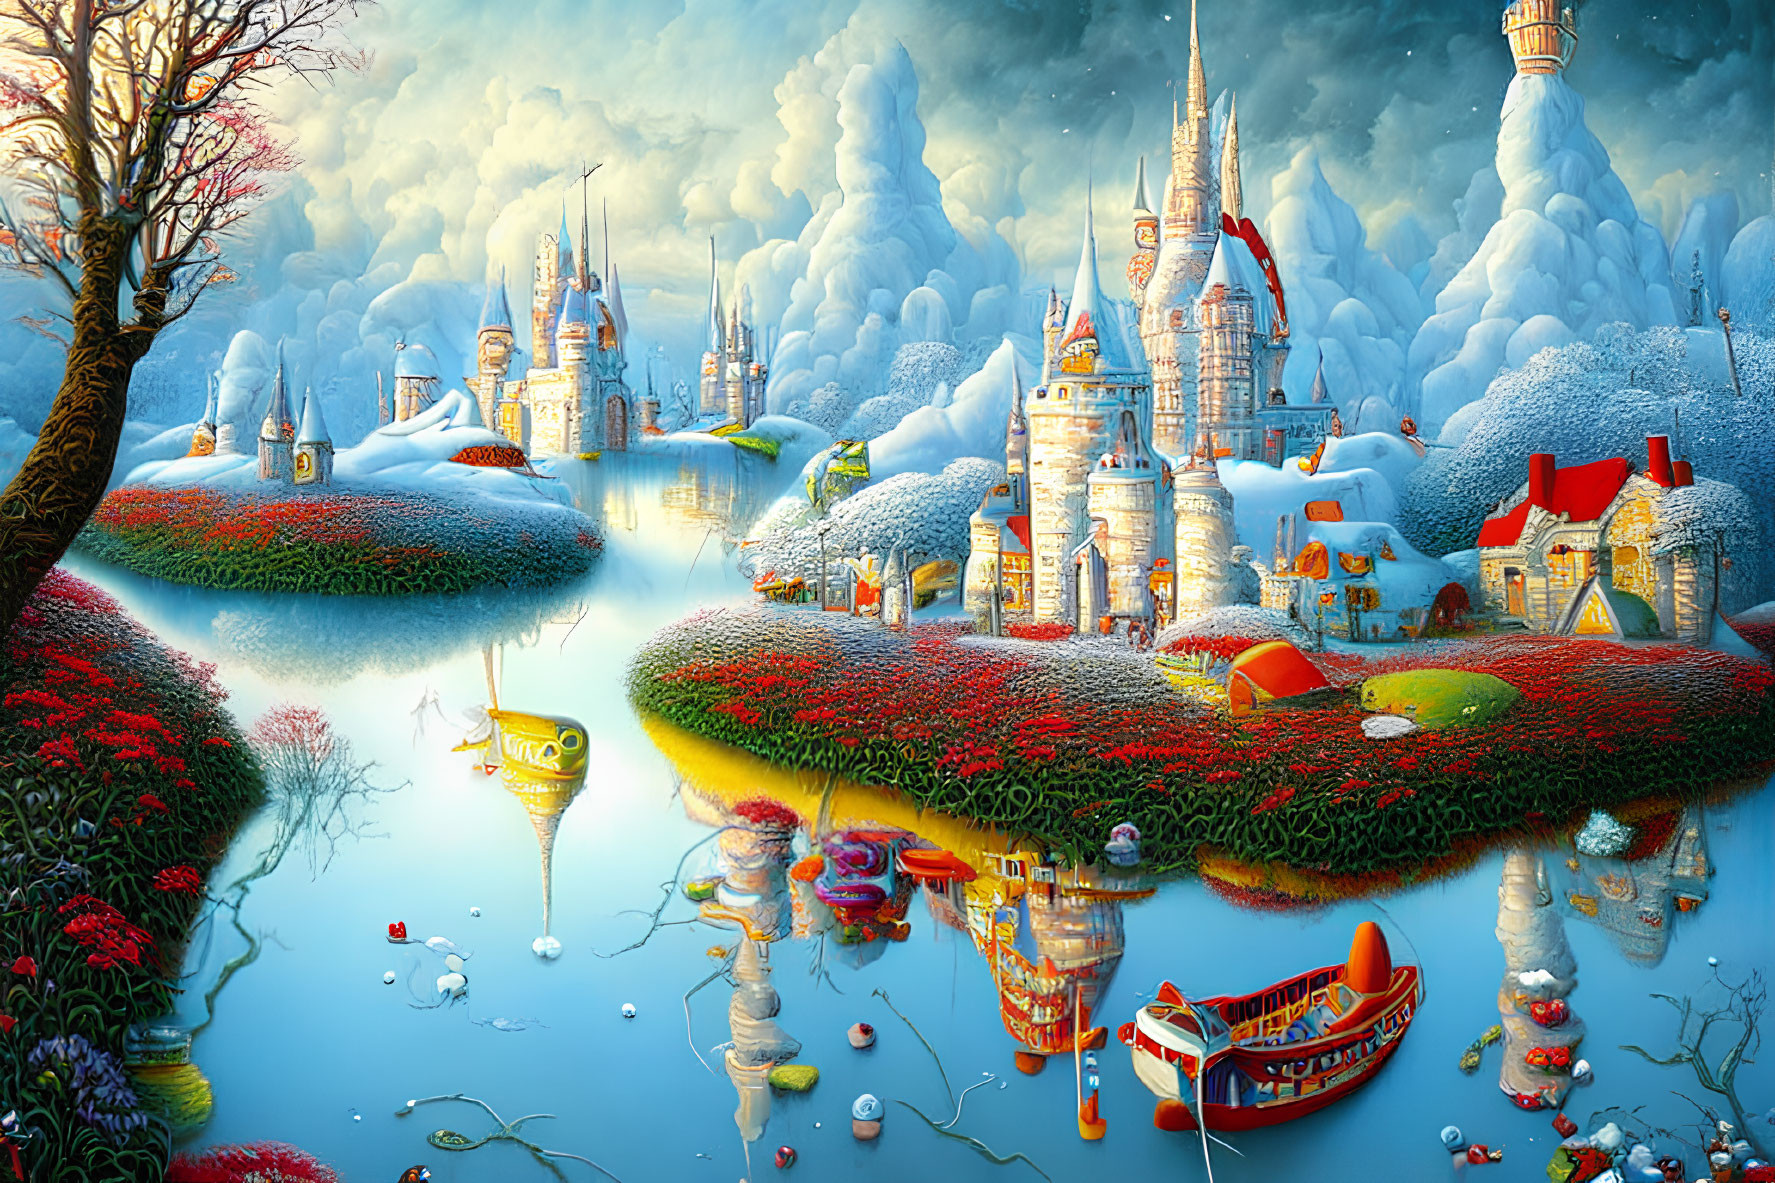 Snow-covered castles and colorful flora in vibrant fantasy landscape